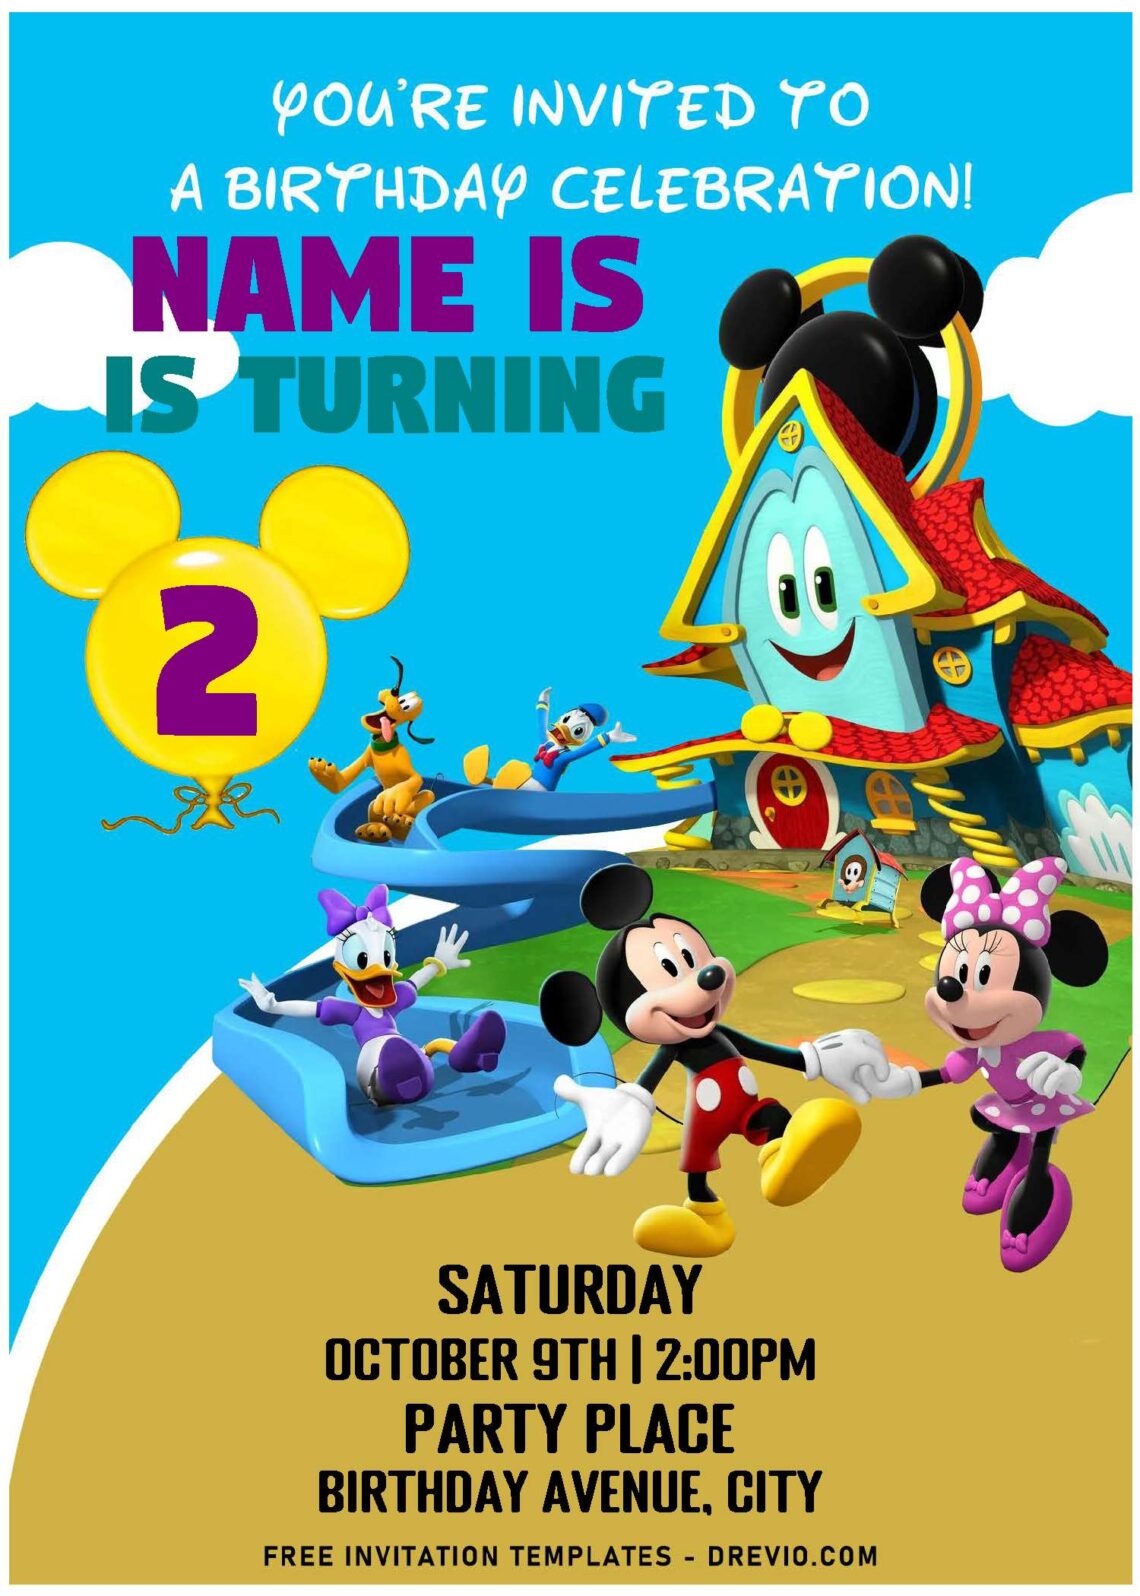 (Free Editable PDF) Ultimate Mickey Mouse Funhouse Birthday Invitation Templates with adorable Minnie Mouse